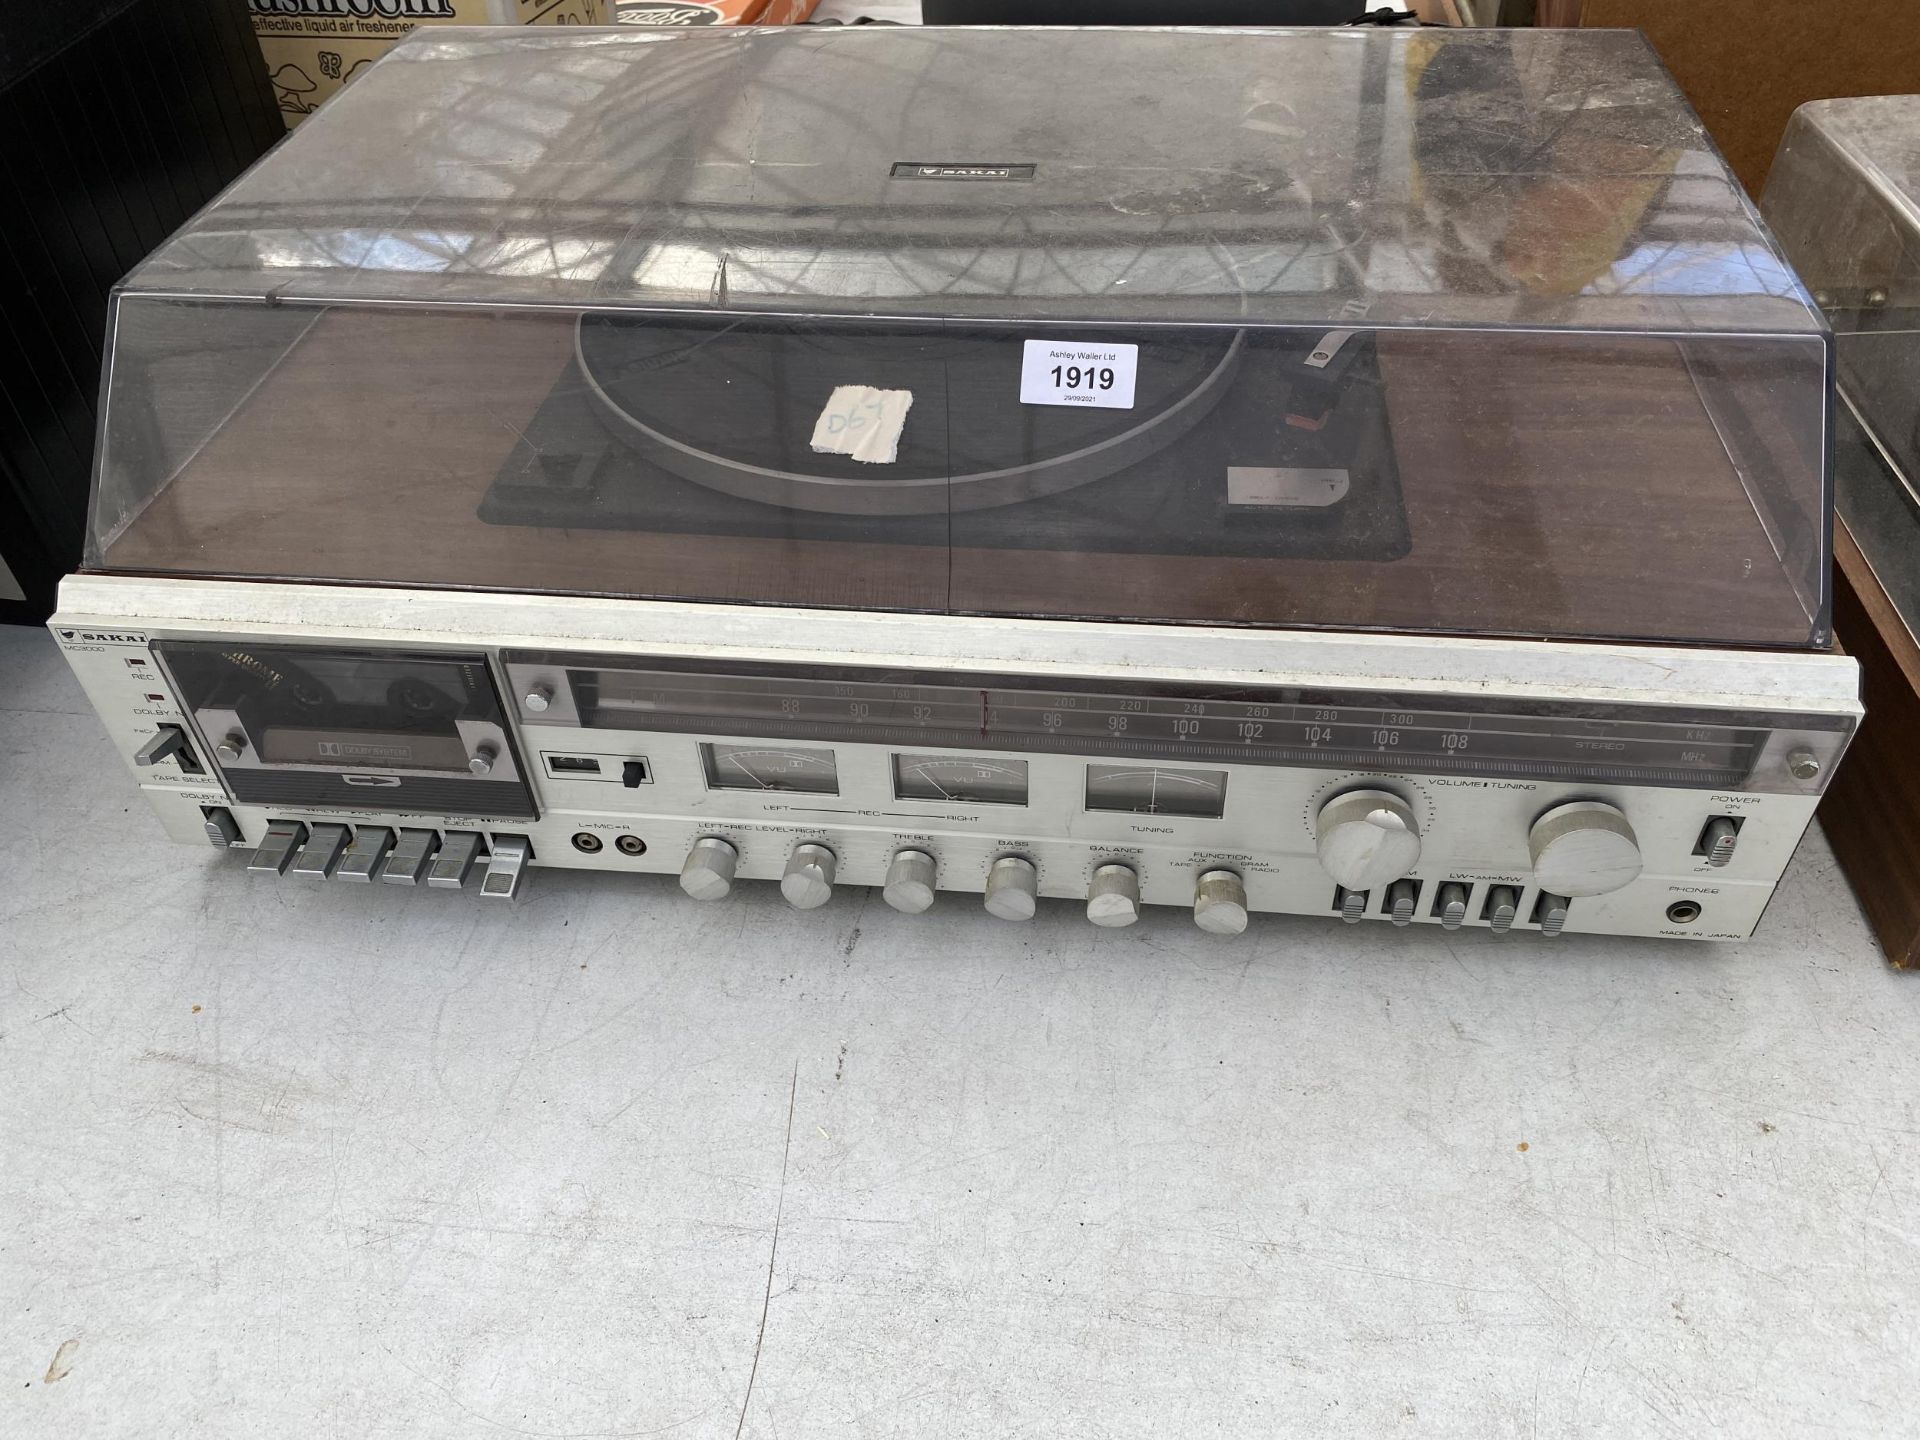 A CASED SAKAI RECORD DECK WITH TUNER AND TAPE DECK